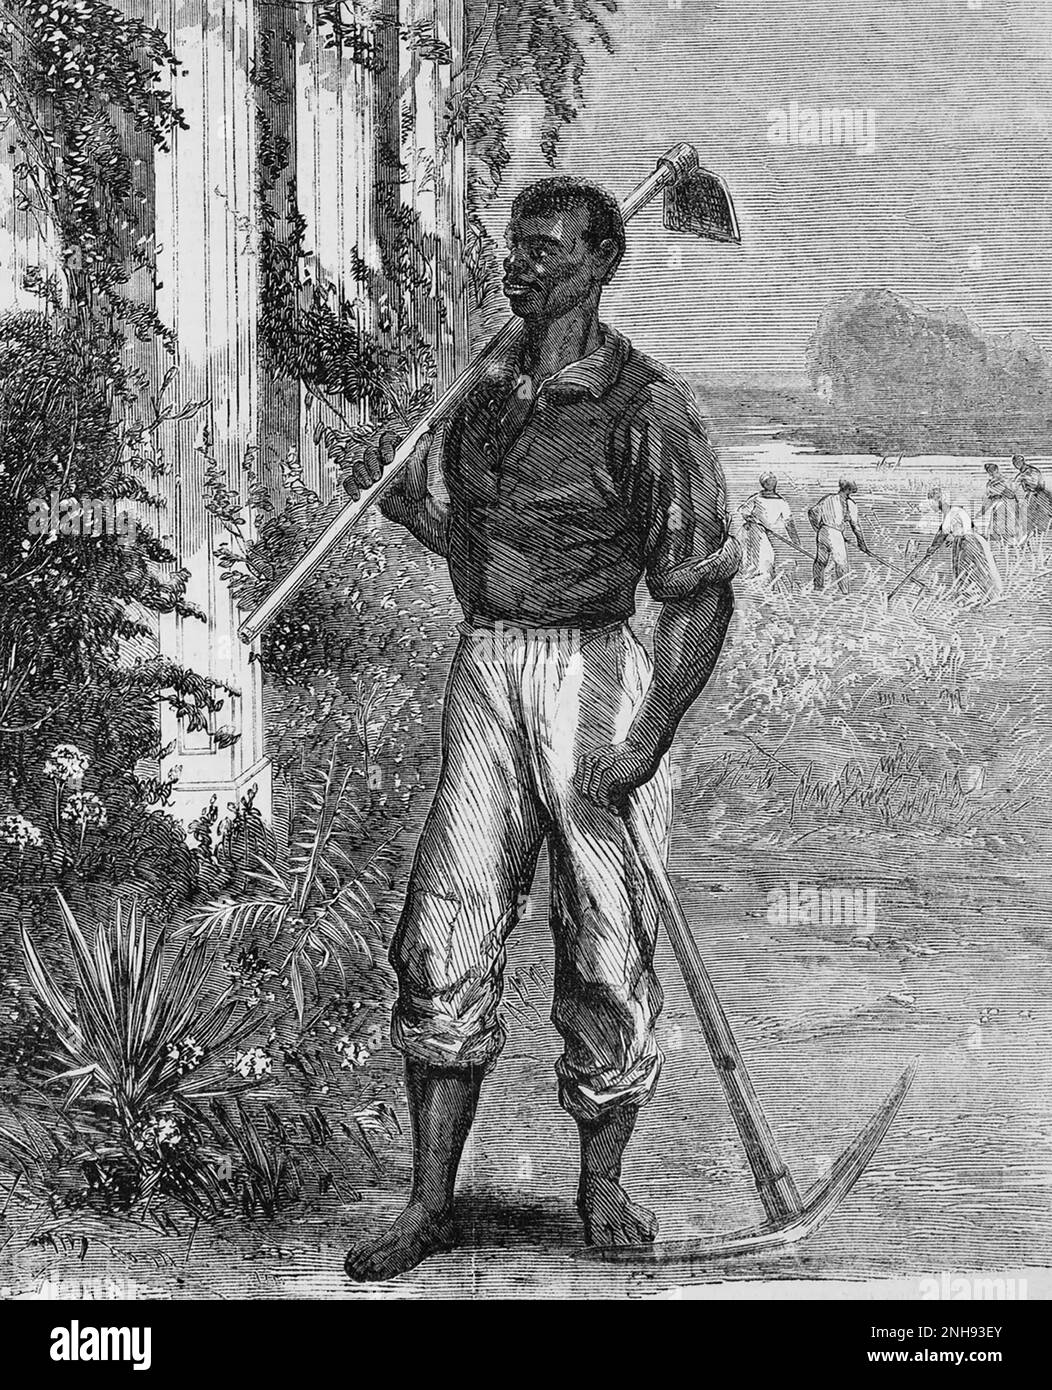 Crop of a satirical illustration of 'the great labor question from a Southern point of view' showing a black man standing on a Southern plantation with pick and hoe. Harper's Weekly, July 29, 1865. See 2452956 for full image. Stock Photo